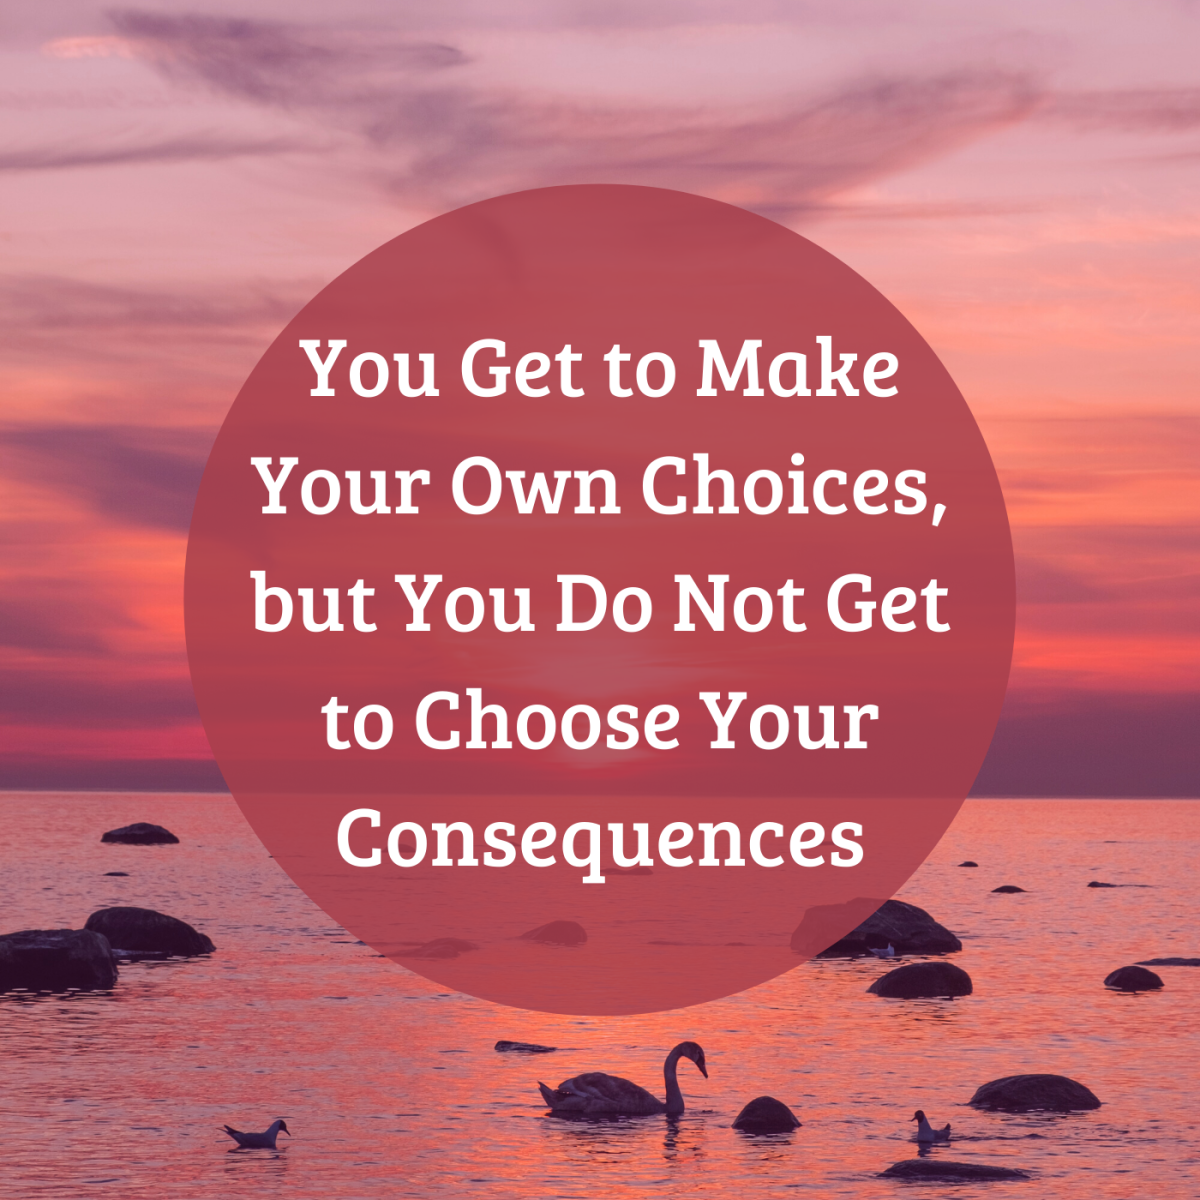 Every choice you make has a consequence.